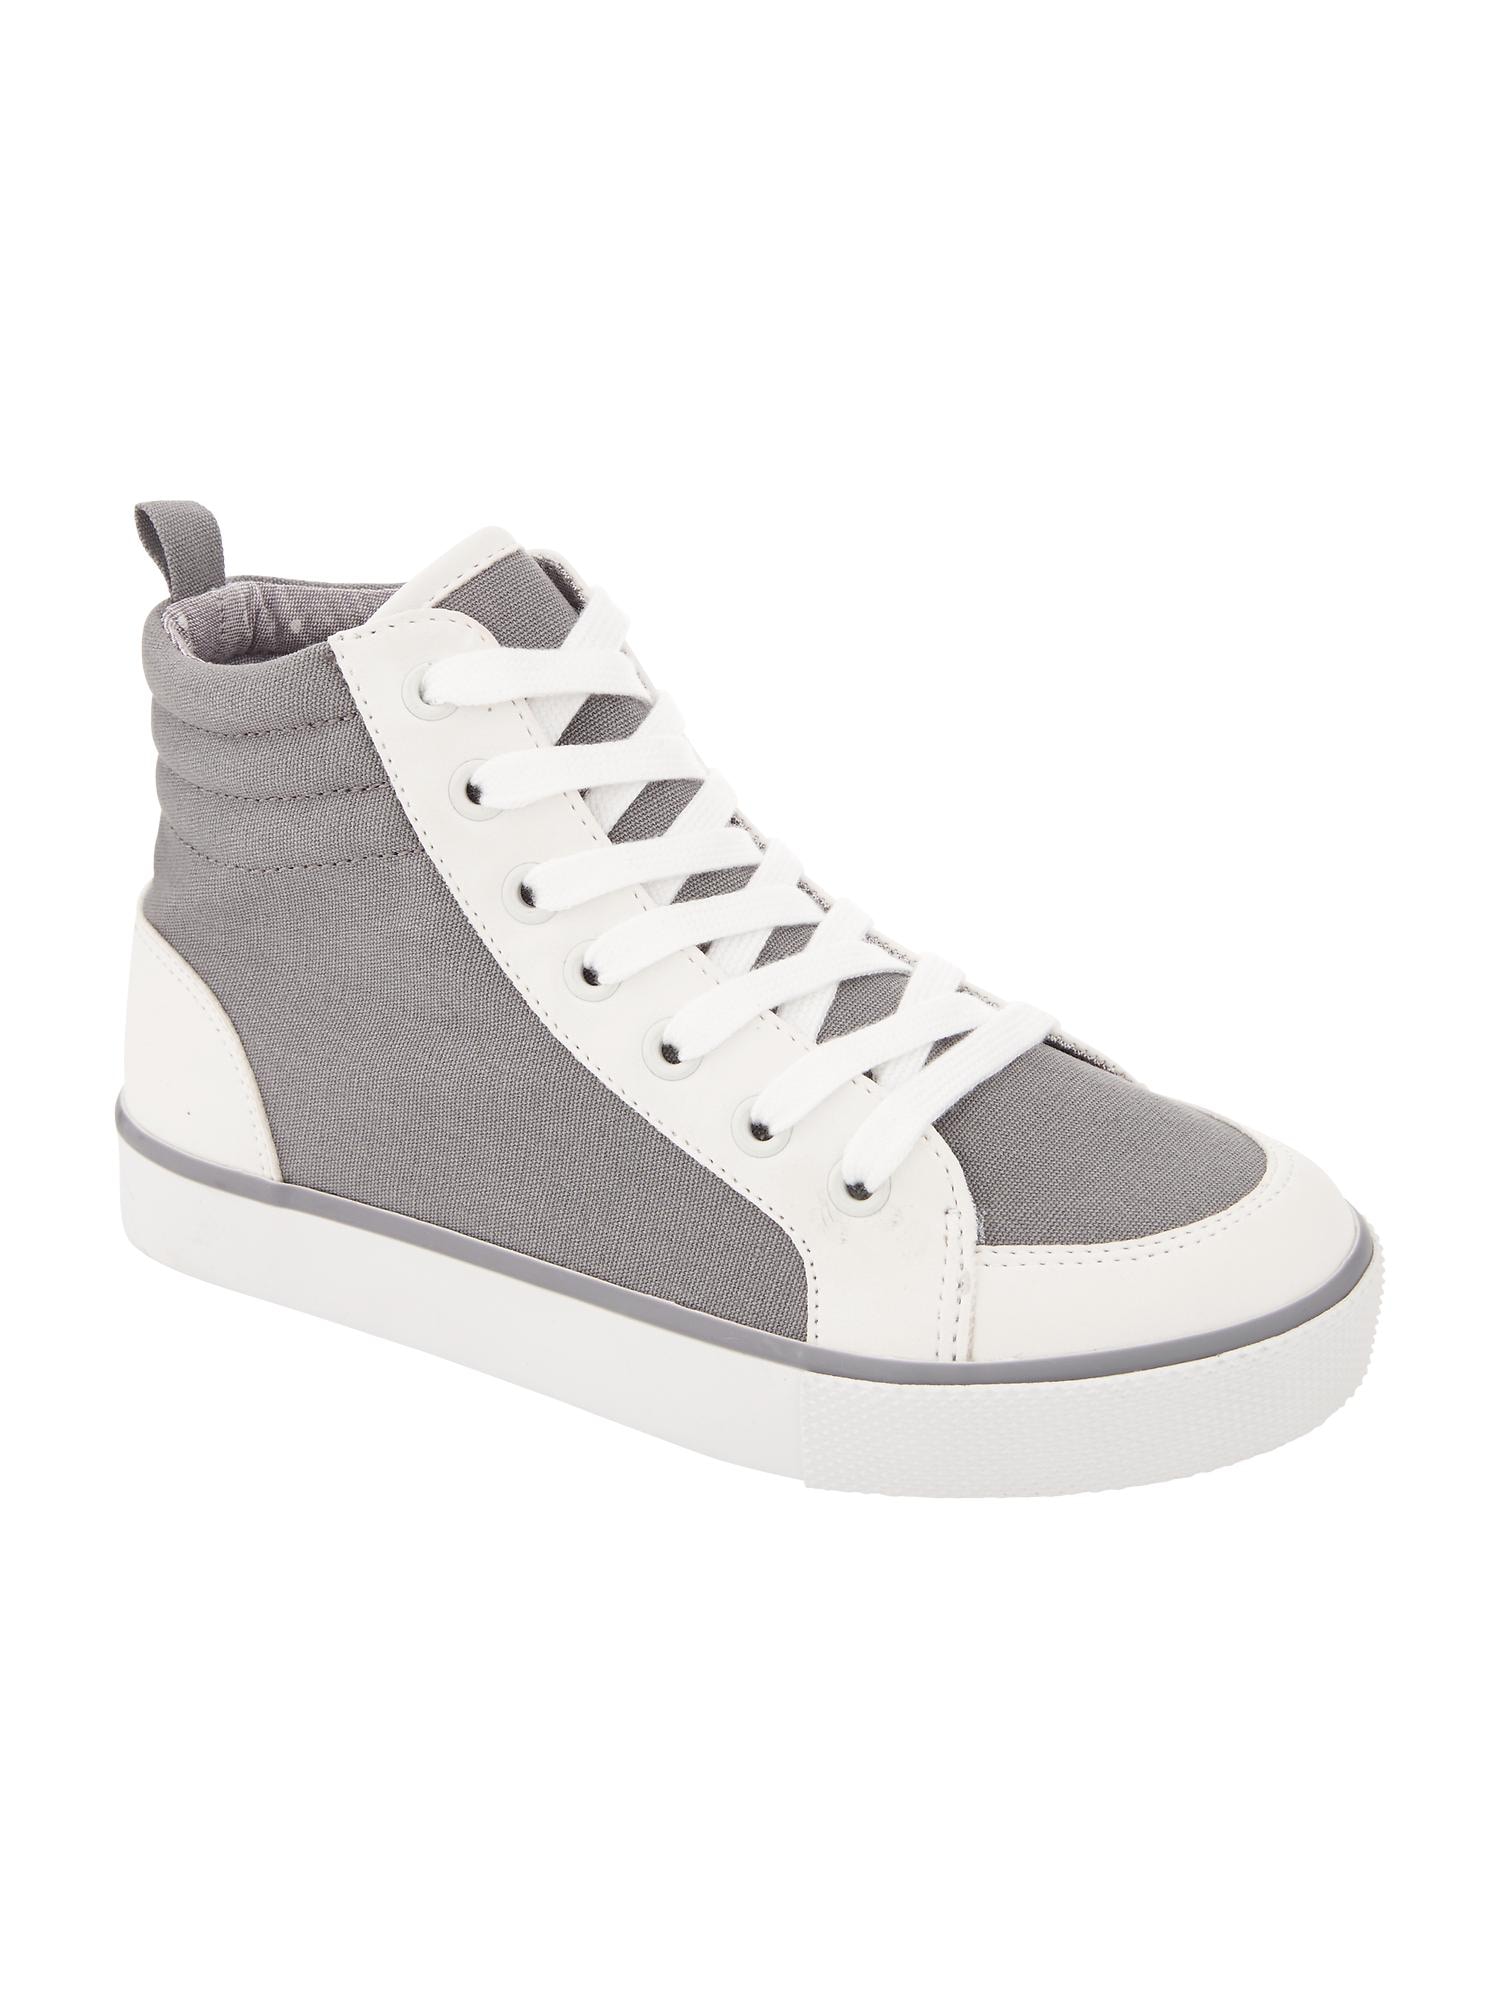 Girls Faux-Leather-Trim High-Tops | Old Navy